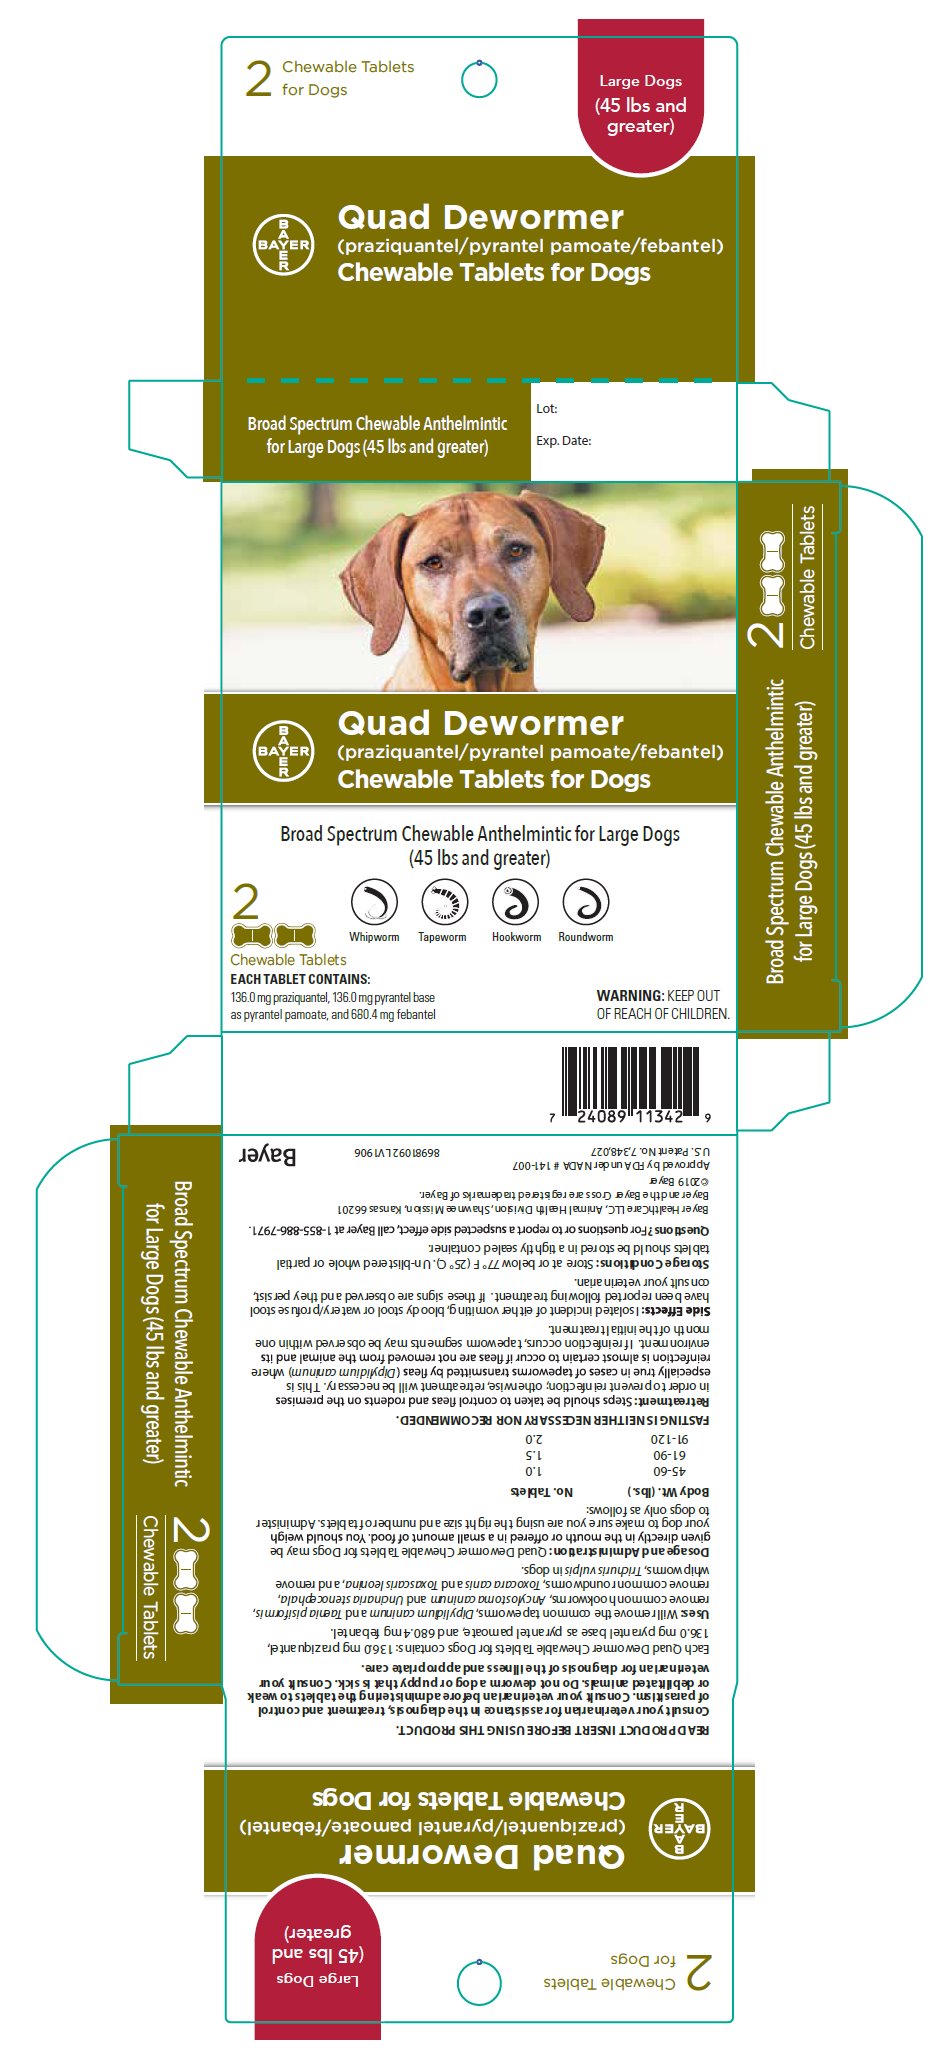 Quad Dewormer (praziquantel/pyrantel pamoate/febantel) Chewable Tablets for Dogs label - large dogs (45 lbs and greater)